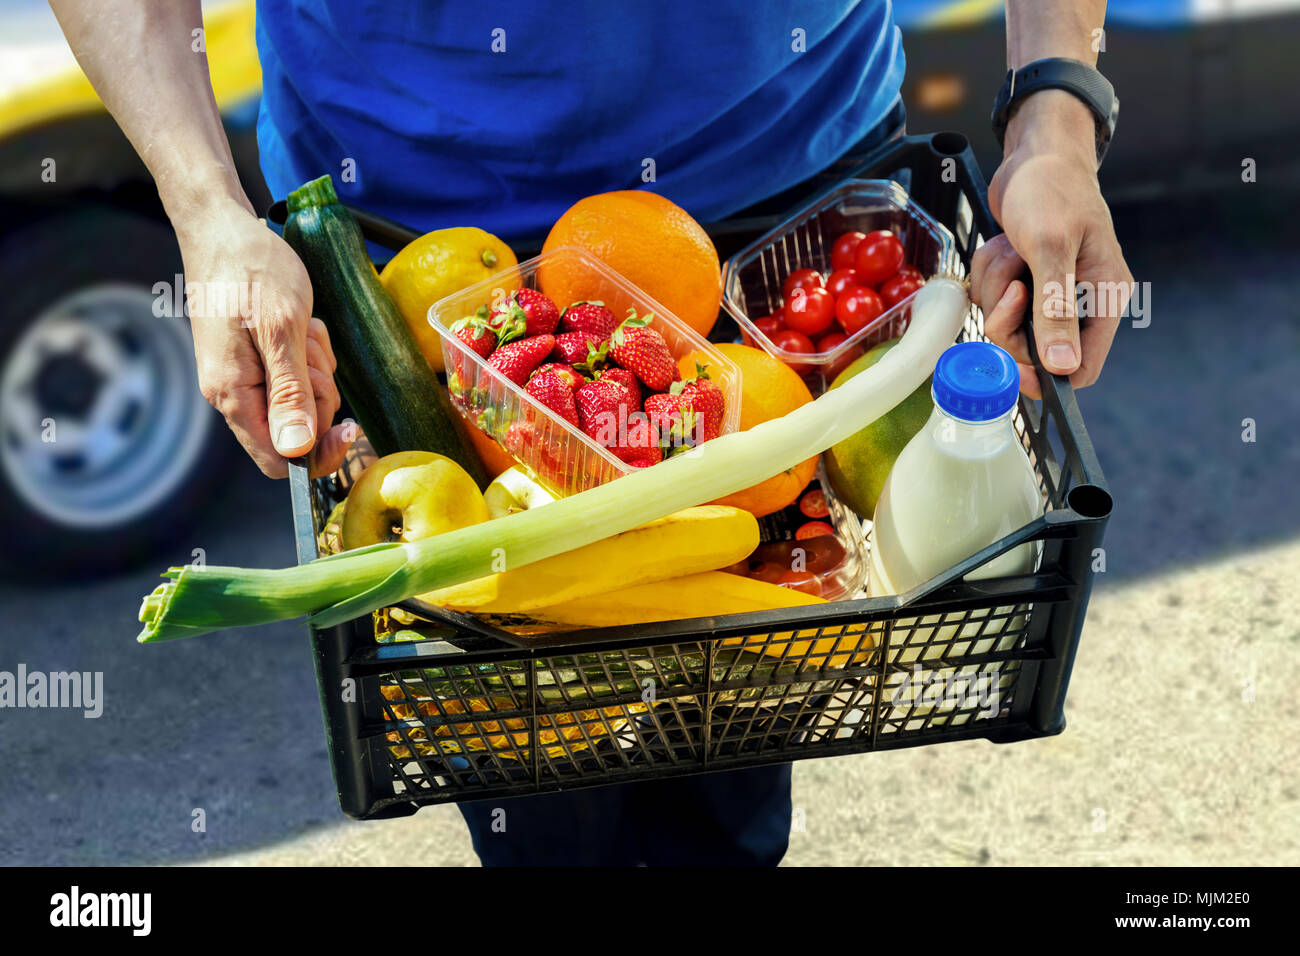 groceries delivery service Stock Photo